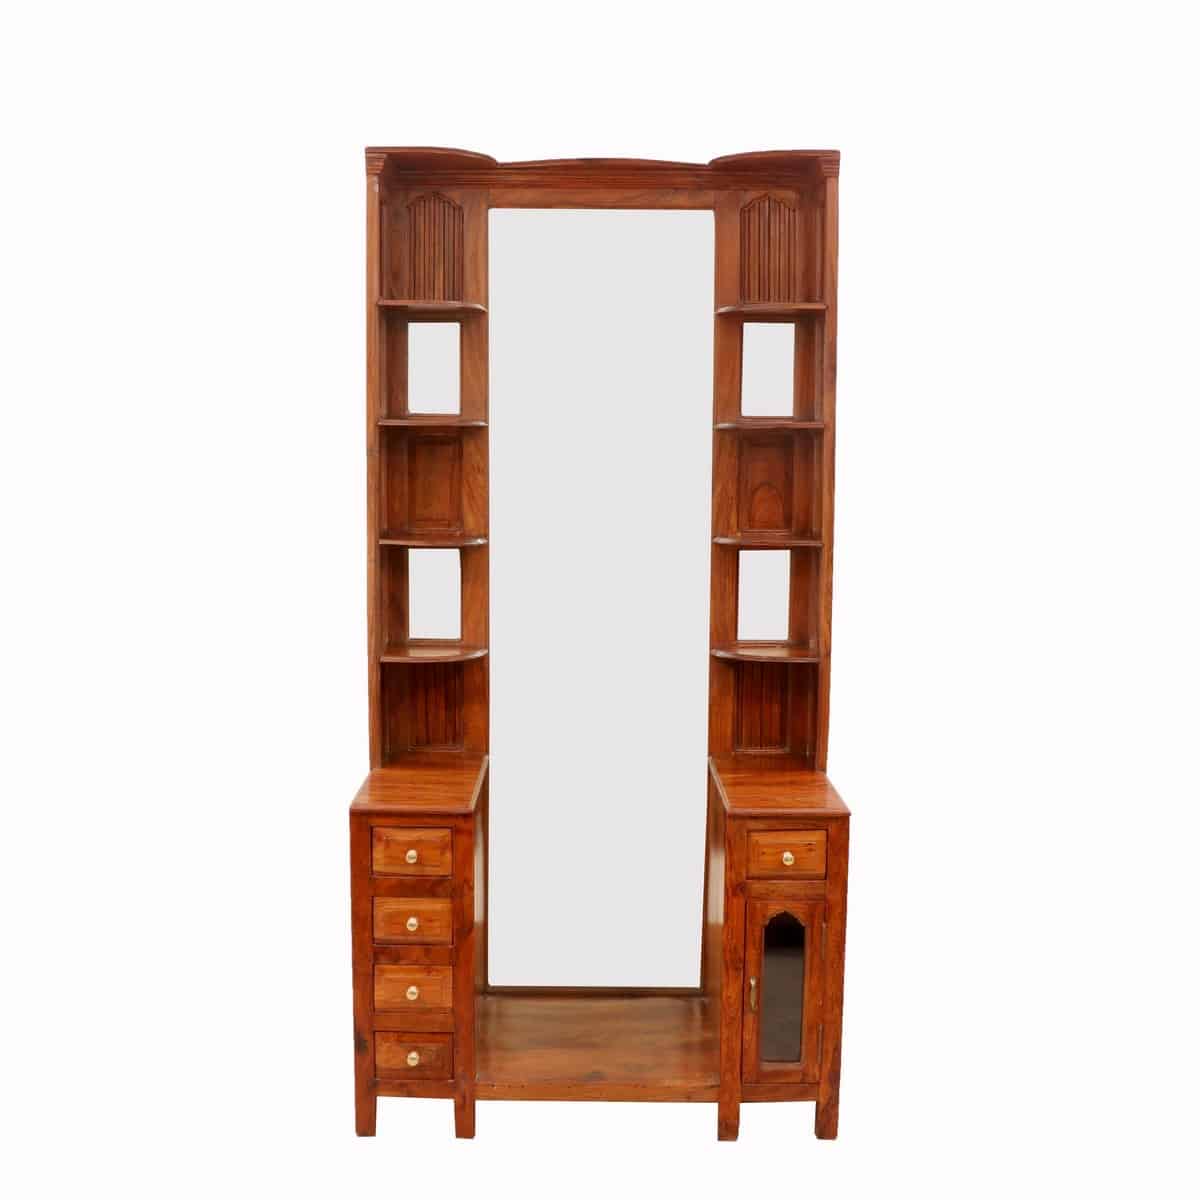 Latest Mirror Wooden Dressing Table price in India